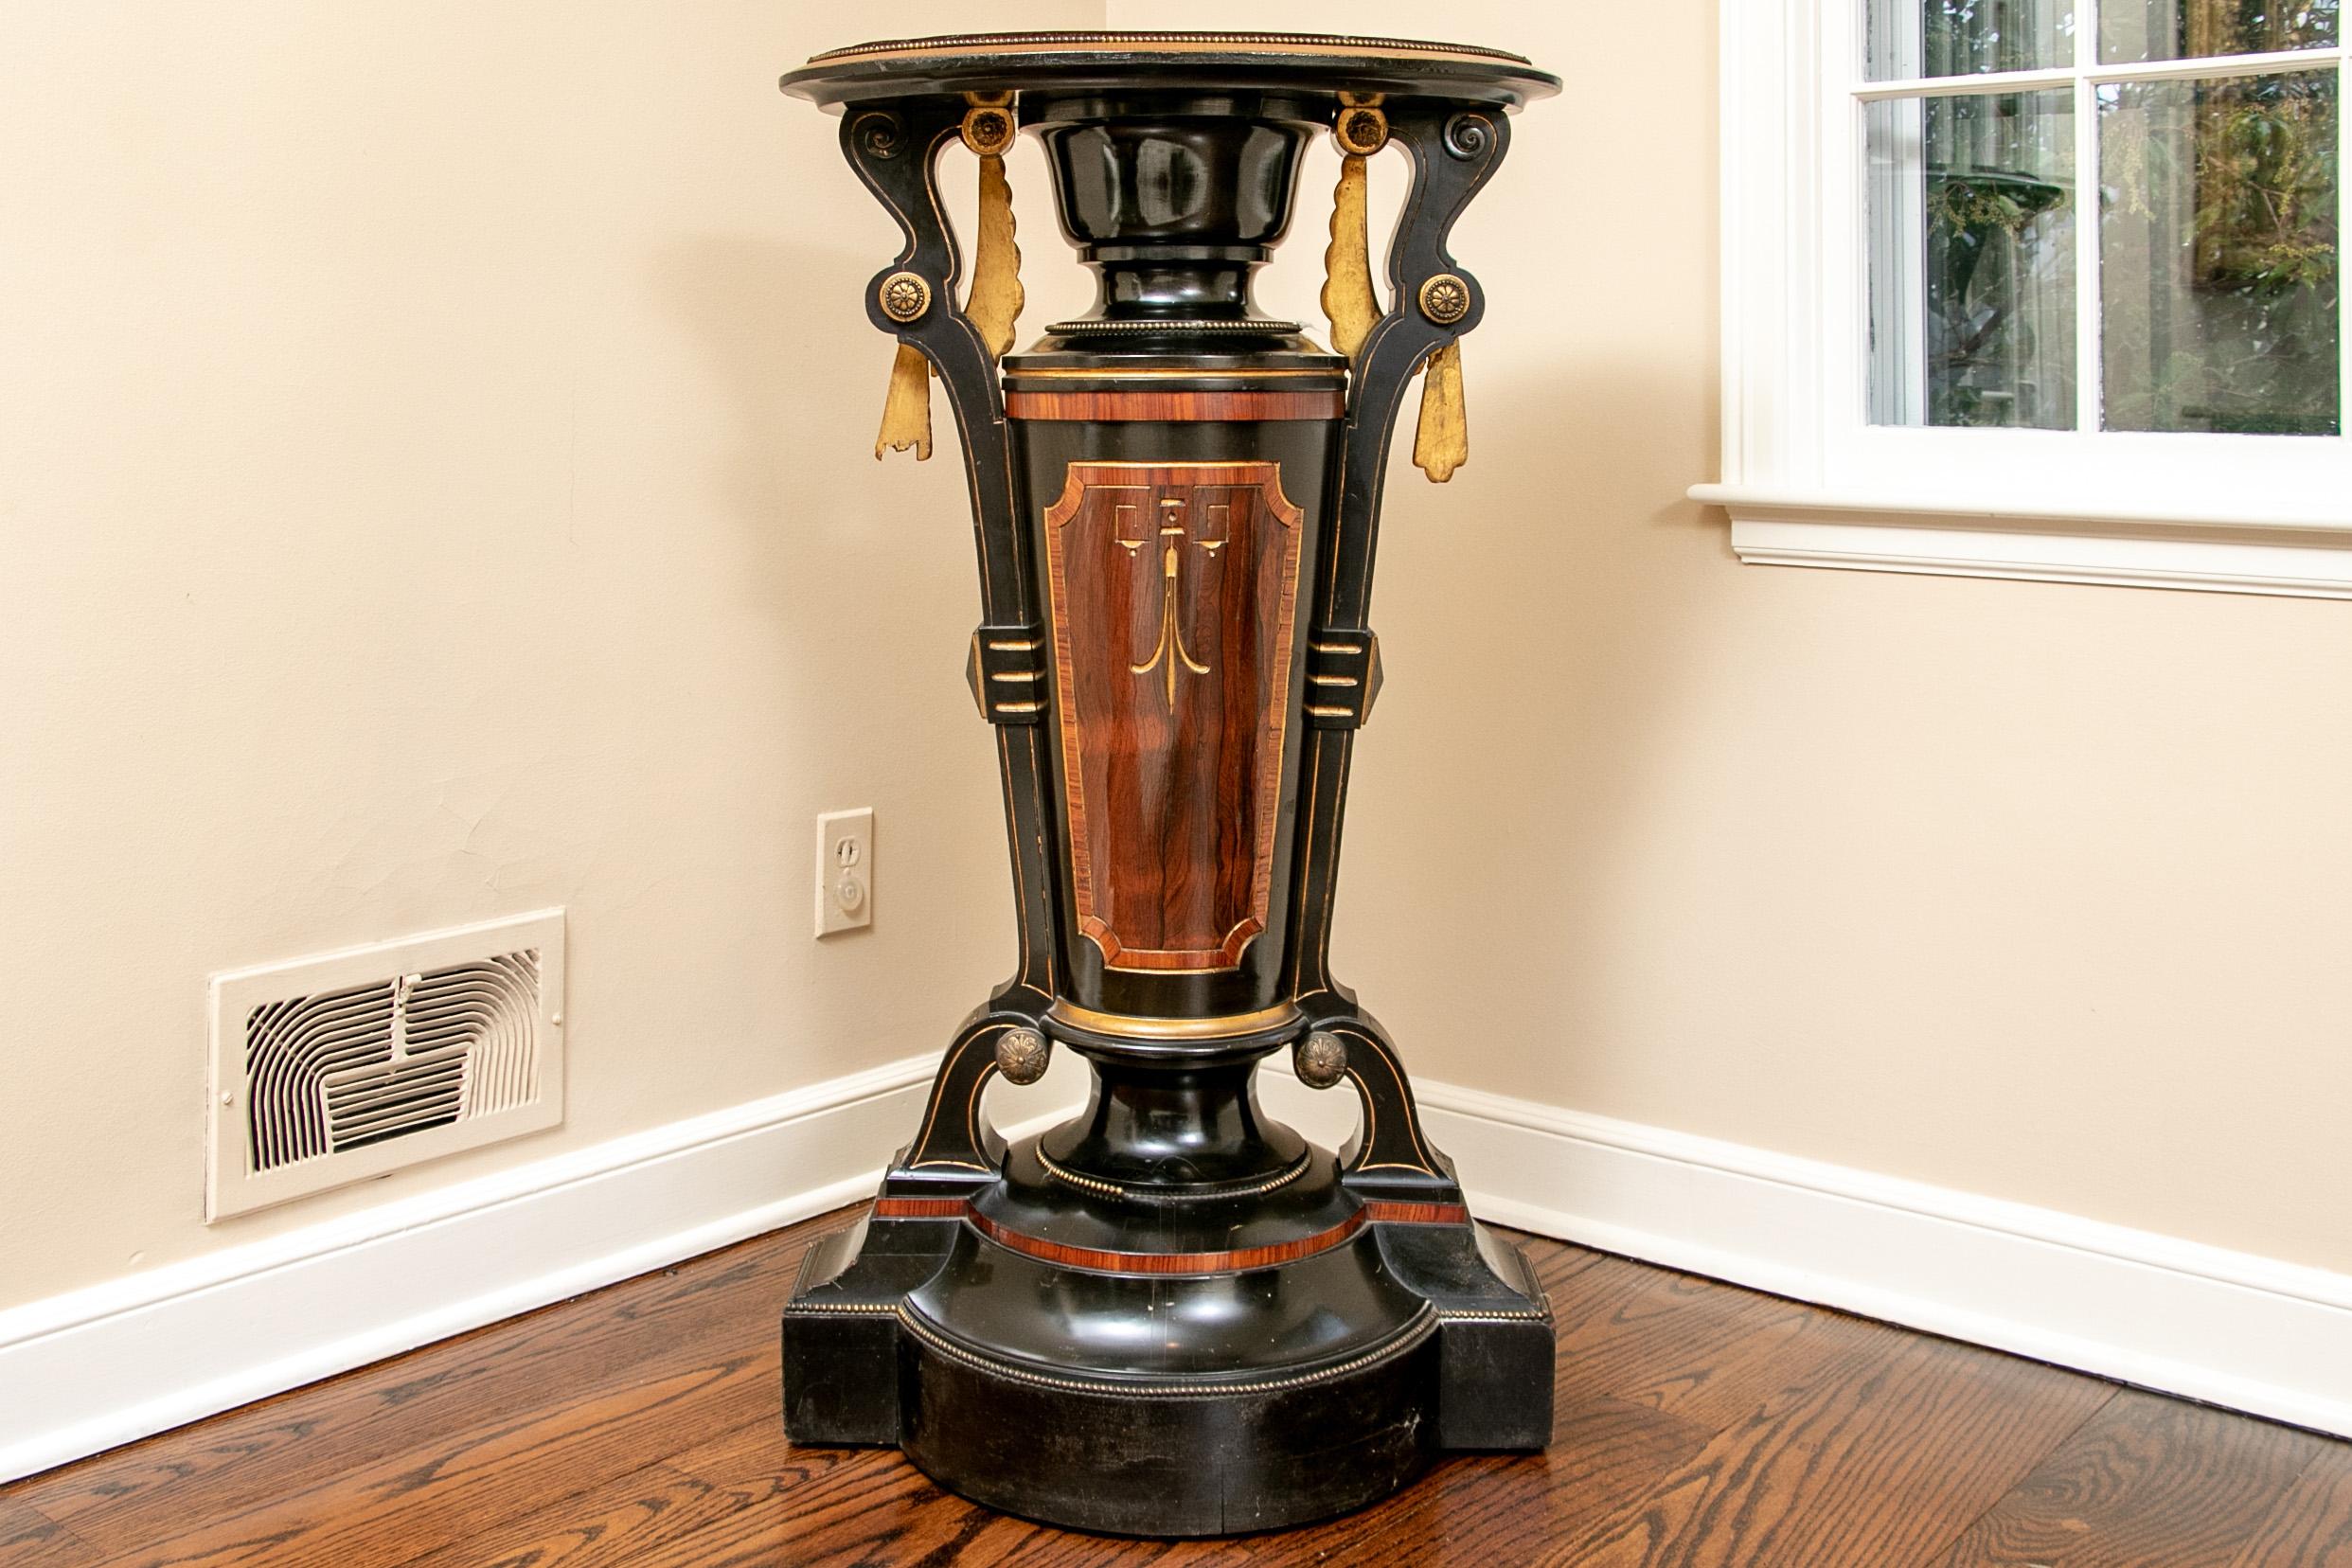 A very decorative and elaborate display pedestal that’s rare and very desirable. An antique oval velvet covered top sits astride an elongated hourglass form base that is ebonized and further decorated with gilt swags, rare wood accents, beading and